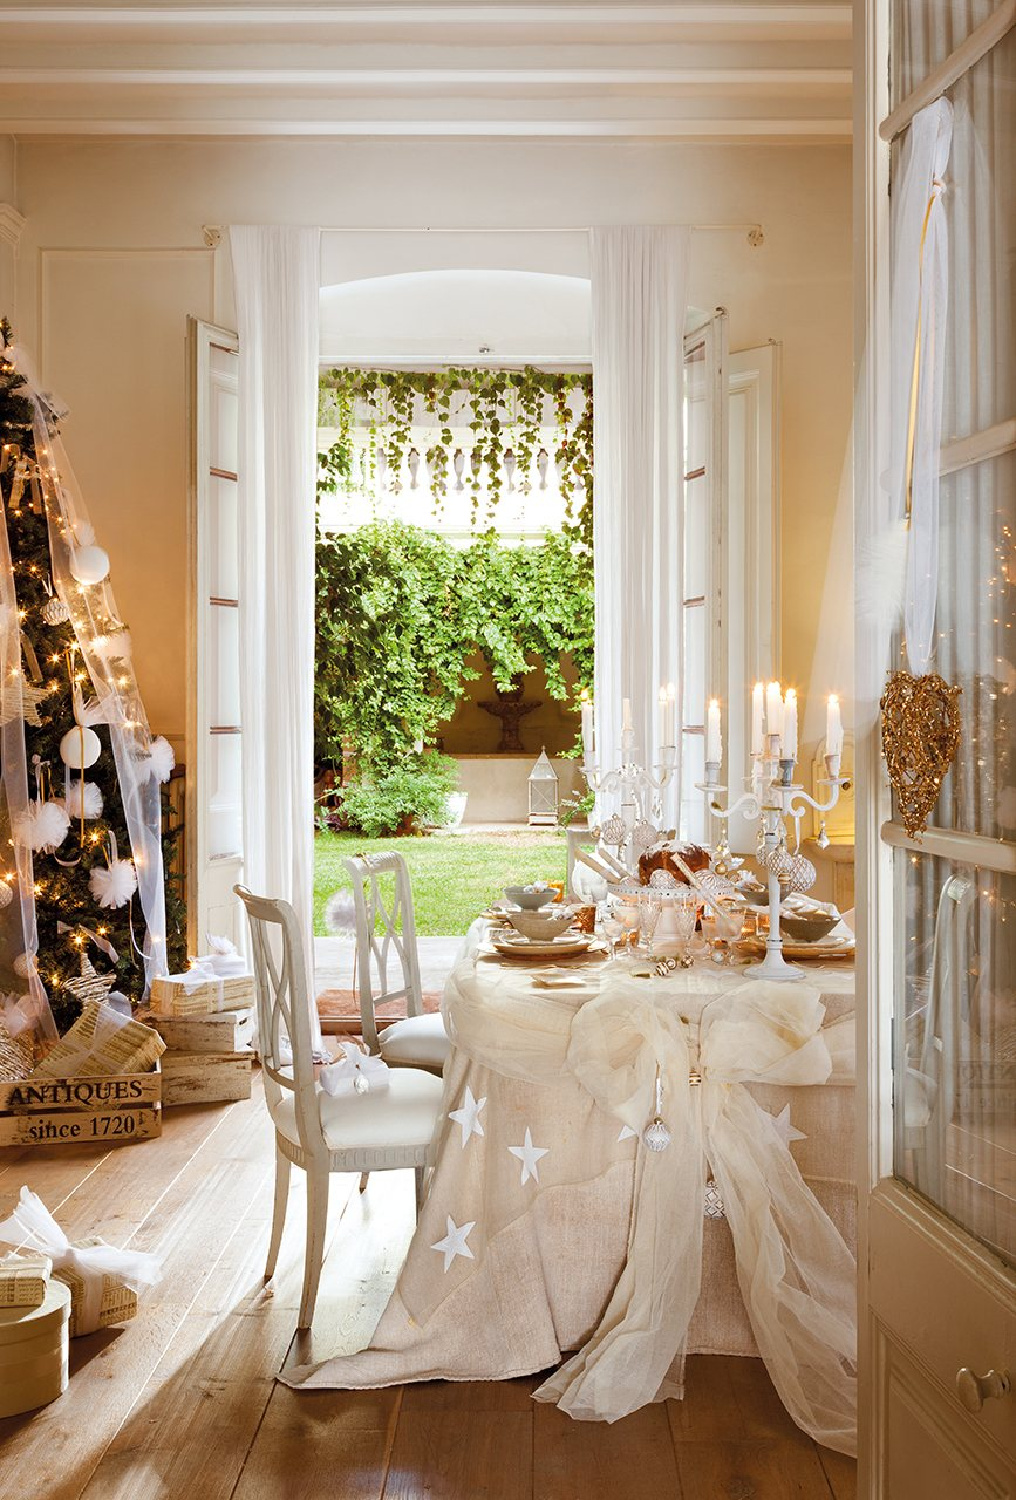 White French country Christmas decor in a Maresme Spain cottage - El Mueble magazine. #frenchcountrychristmas #whitechristmasdecor #nordicchristmas #europeancountry